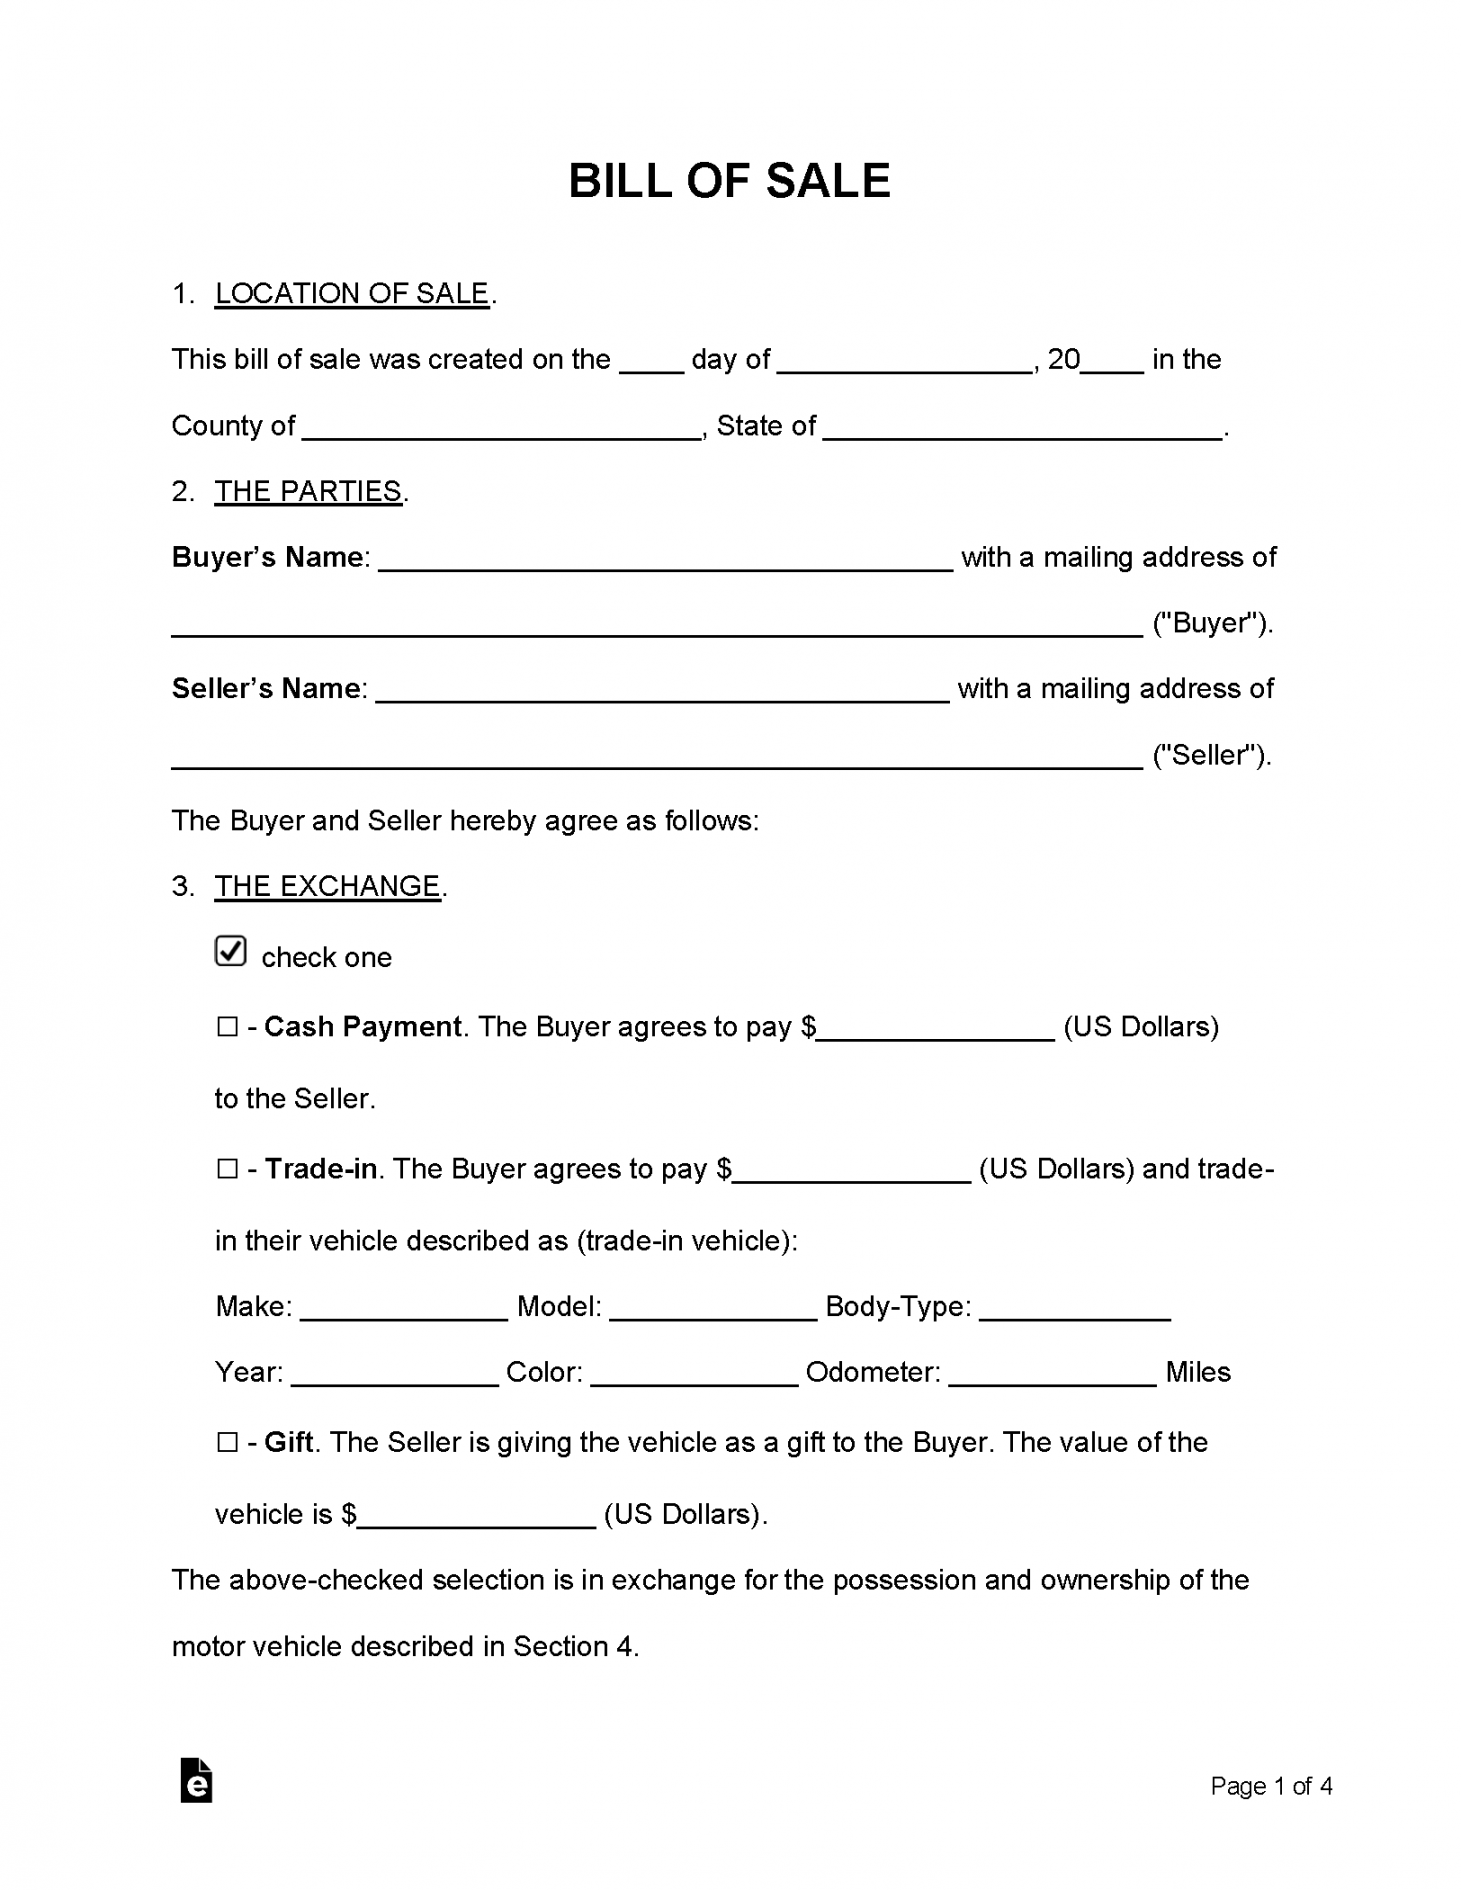 Free Bill of Sale Forms () - PDF  Word – eForms